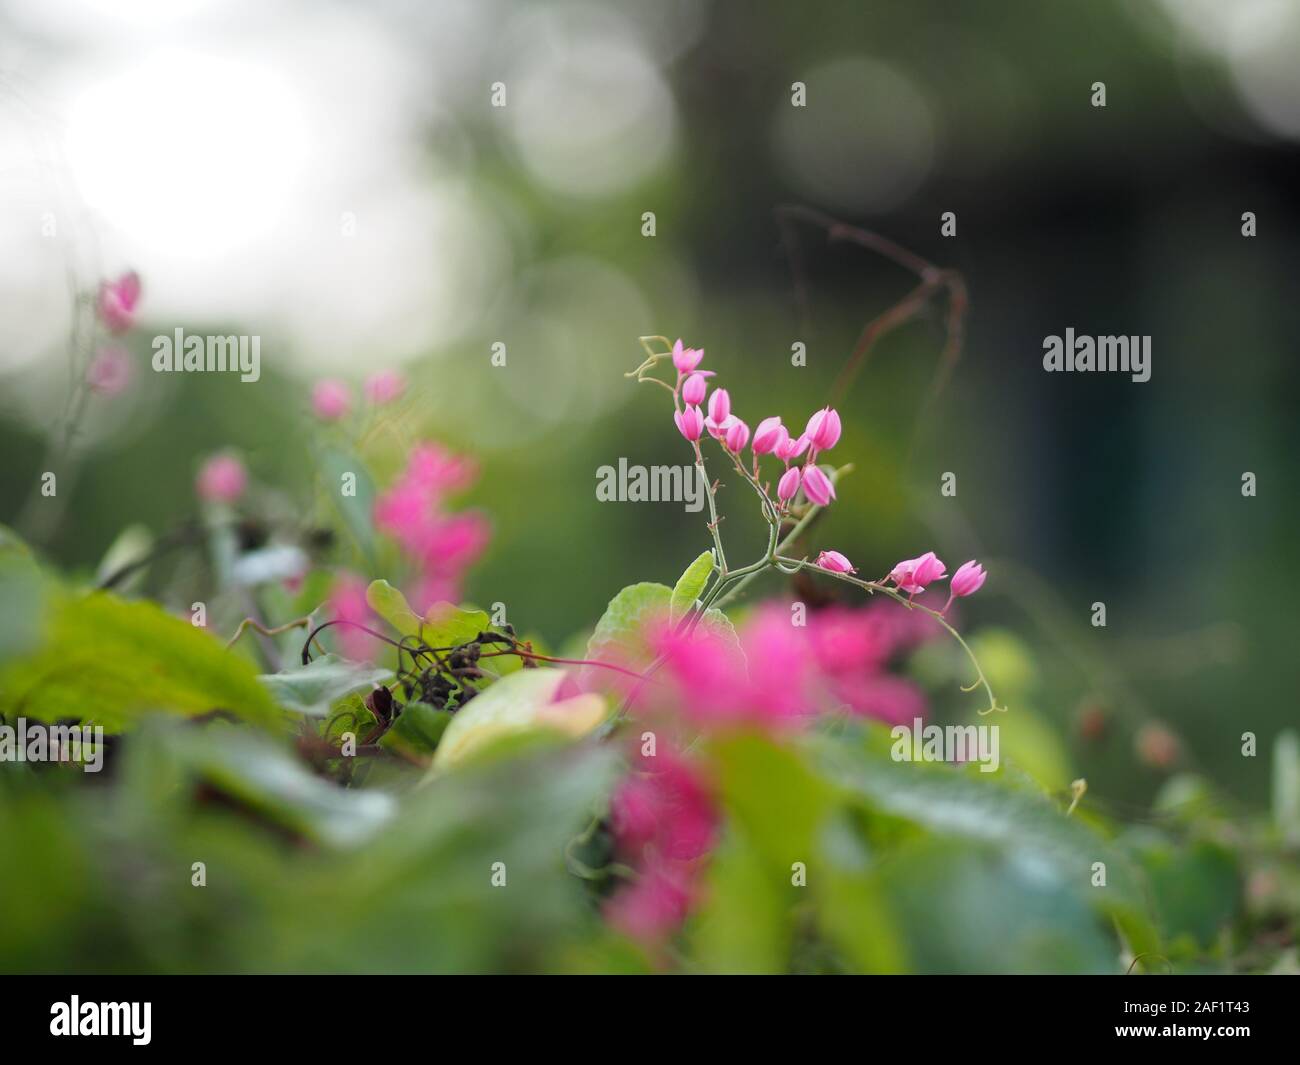 Pink flower small ivy Scientific name Antigonon leptopus Hook, arranged into beautiful bouquets on blurred of nature background Stock Photo